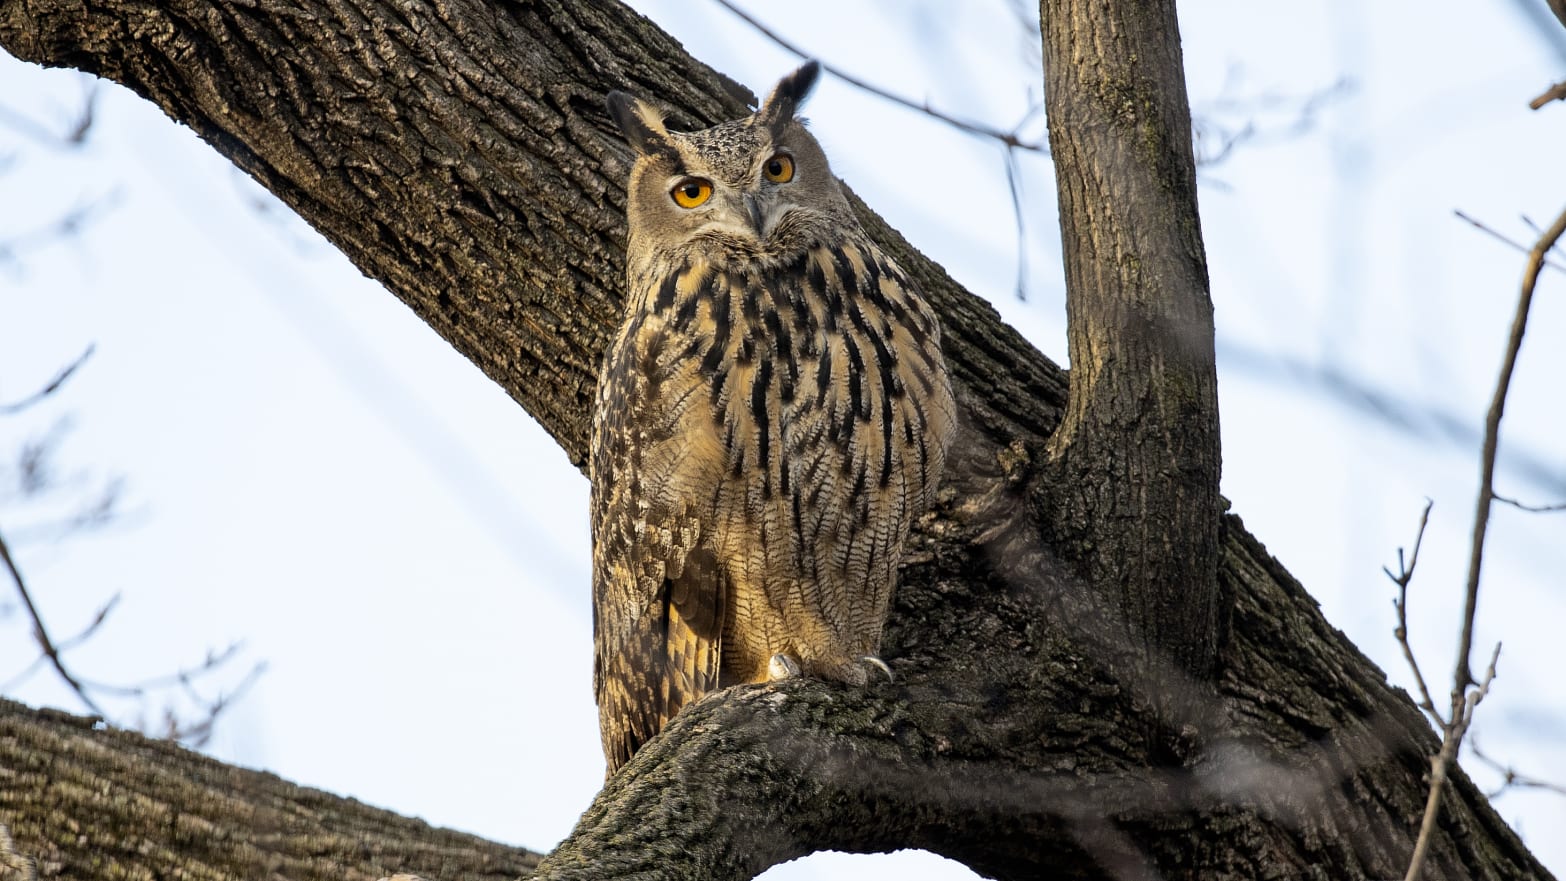 Flaco, a Eurasian eagle owl that escaped from the Central Park Zoo